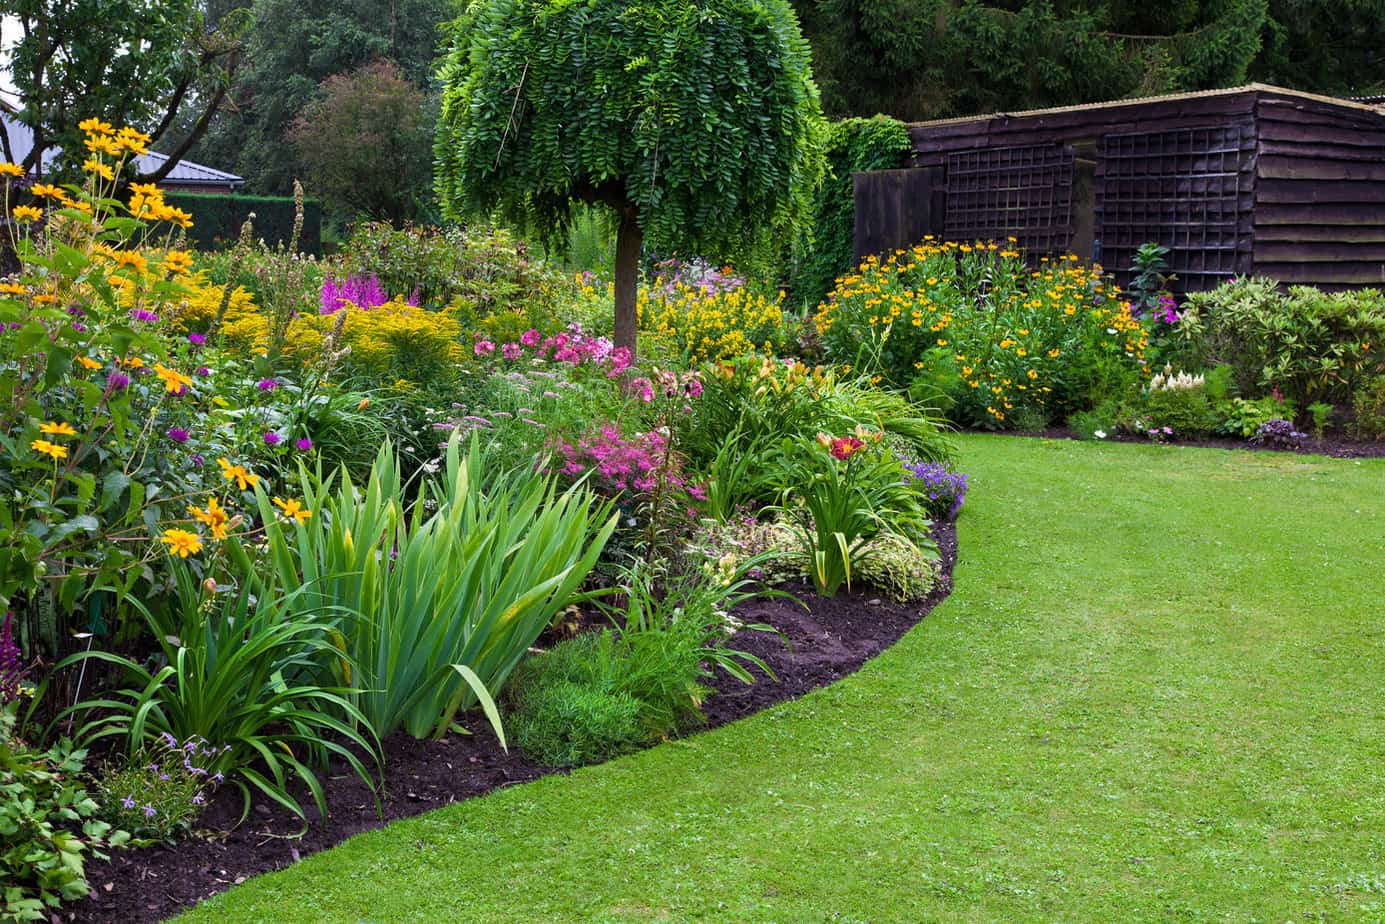 A simple sloped garden with foundation